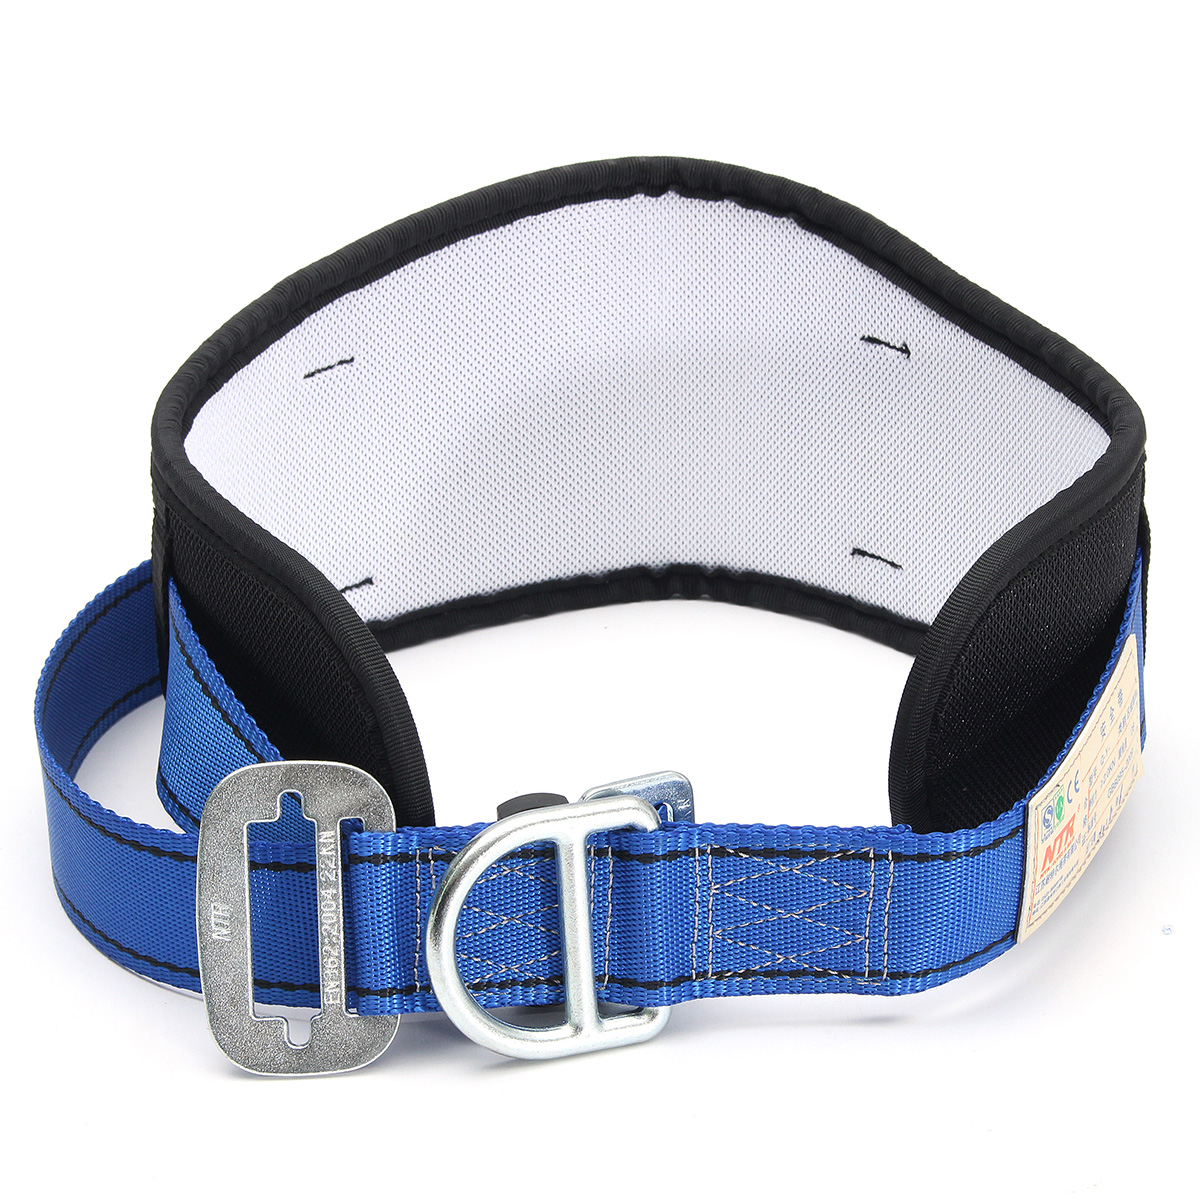 

Safety Rock Climbing Waist Belt Strap Fall Protection Harness Equipment With 2 D-Ring Gear